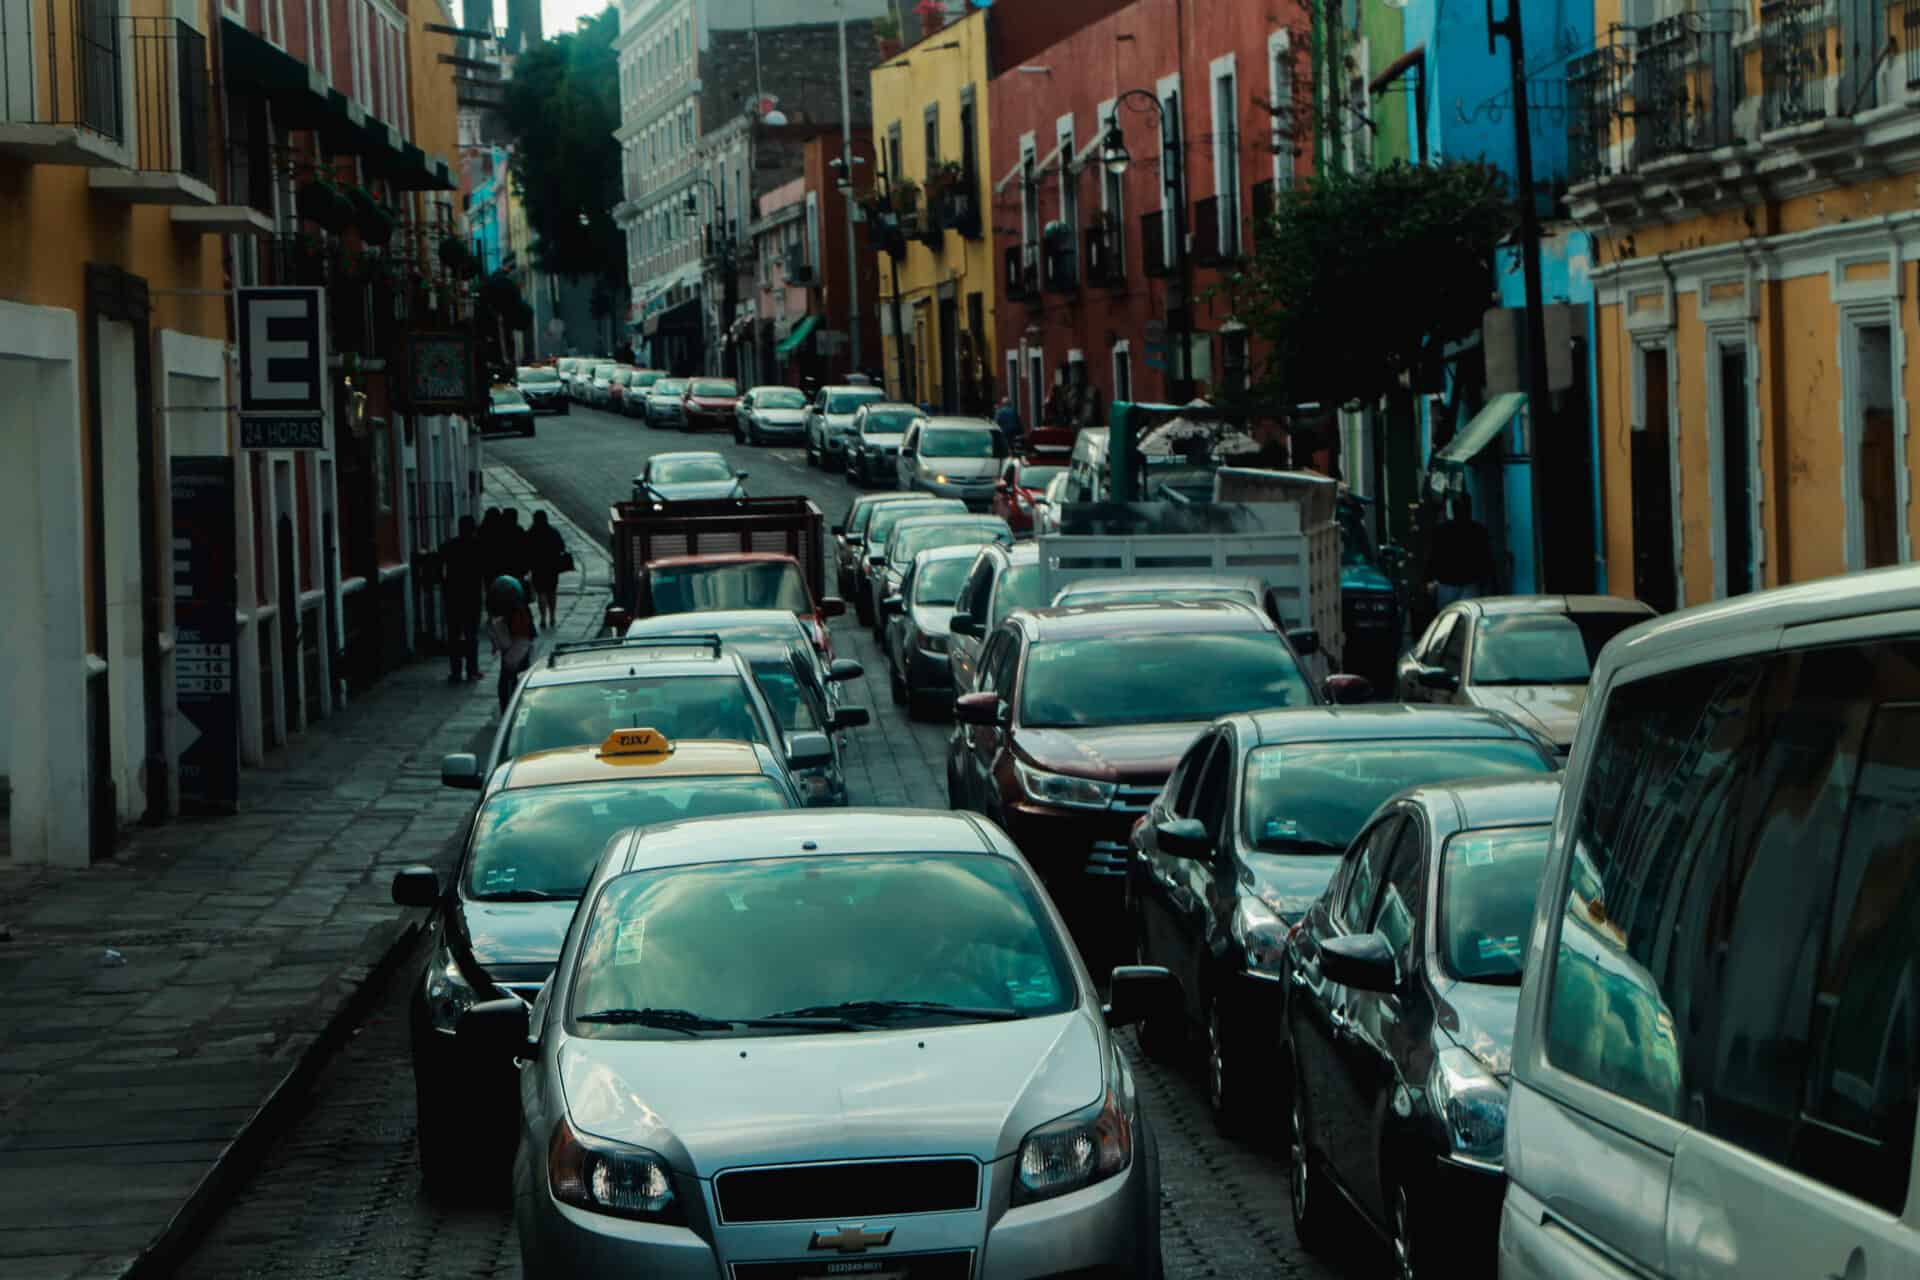 Lines of traffic on cobblestone street in Puebla, Mexico